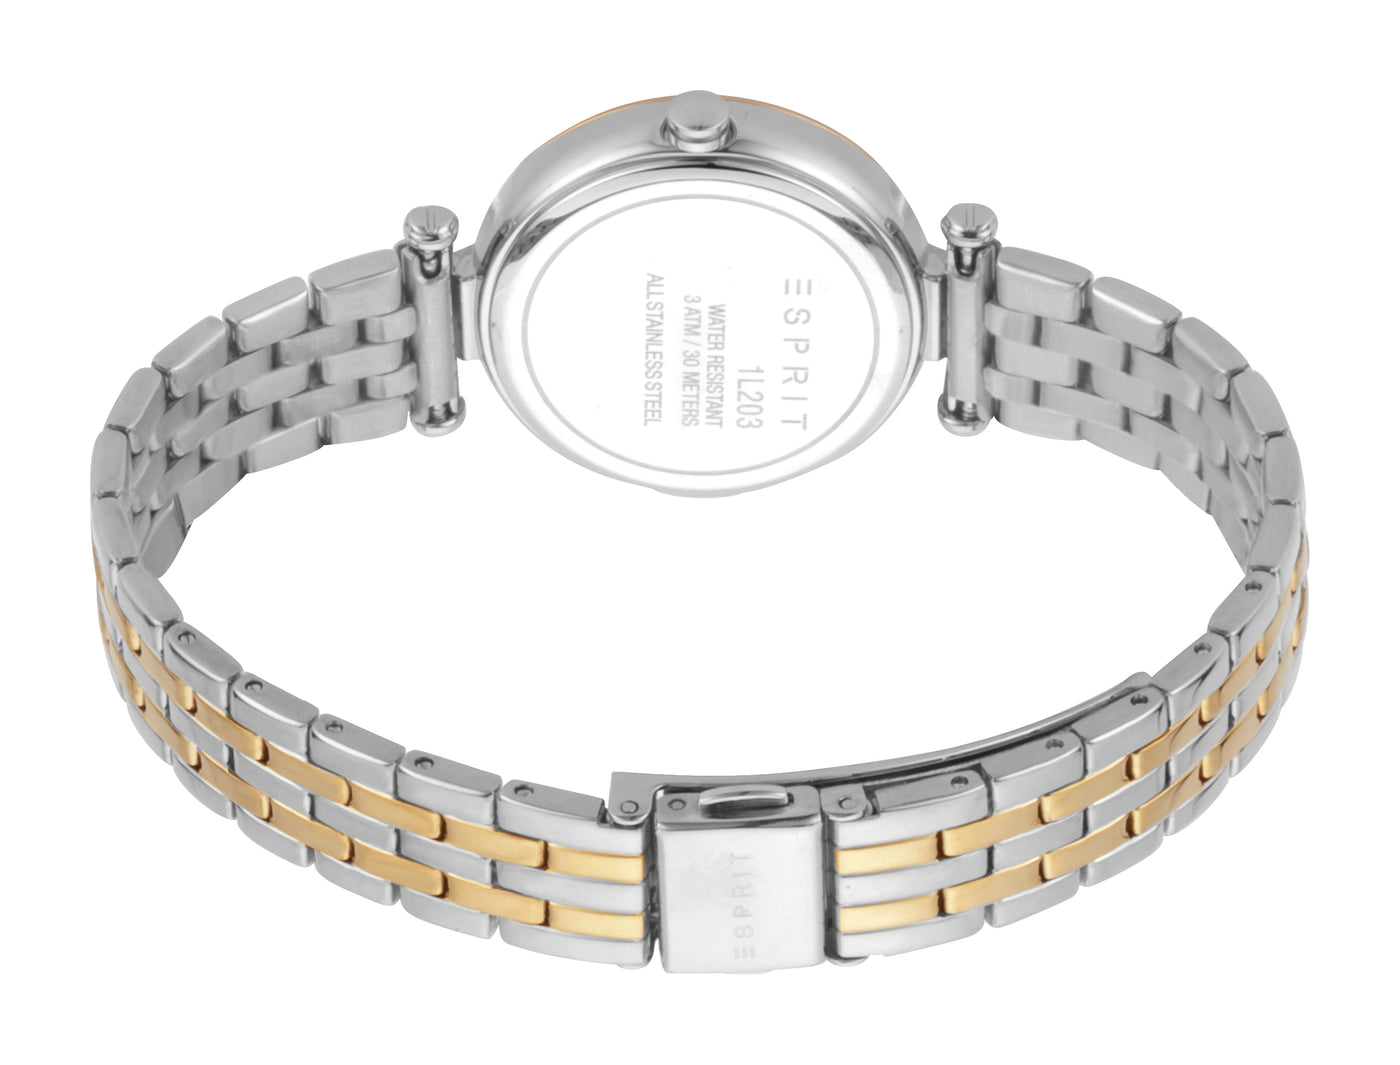 Cherry 3-Hand 30mm Stainless Steel Band